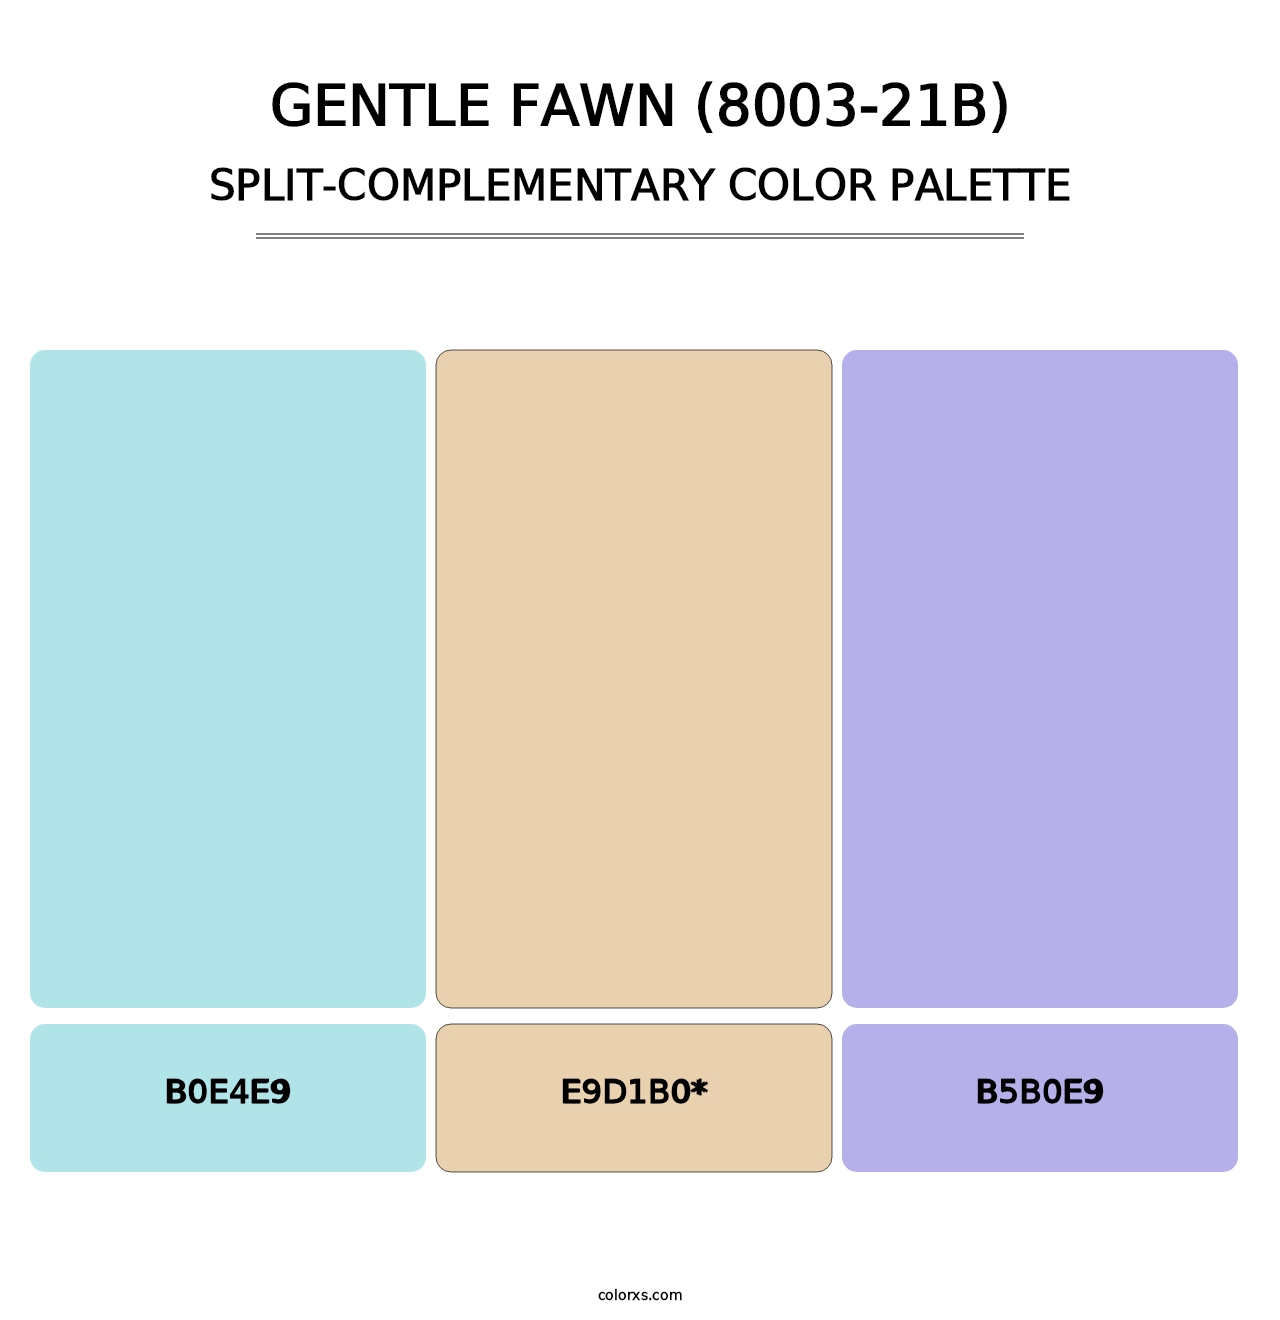 Gentle Fawn (8003-21B) - Split-Complementary Color Palette